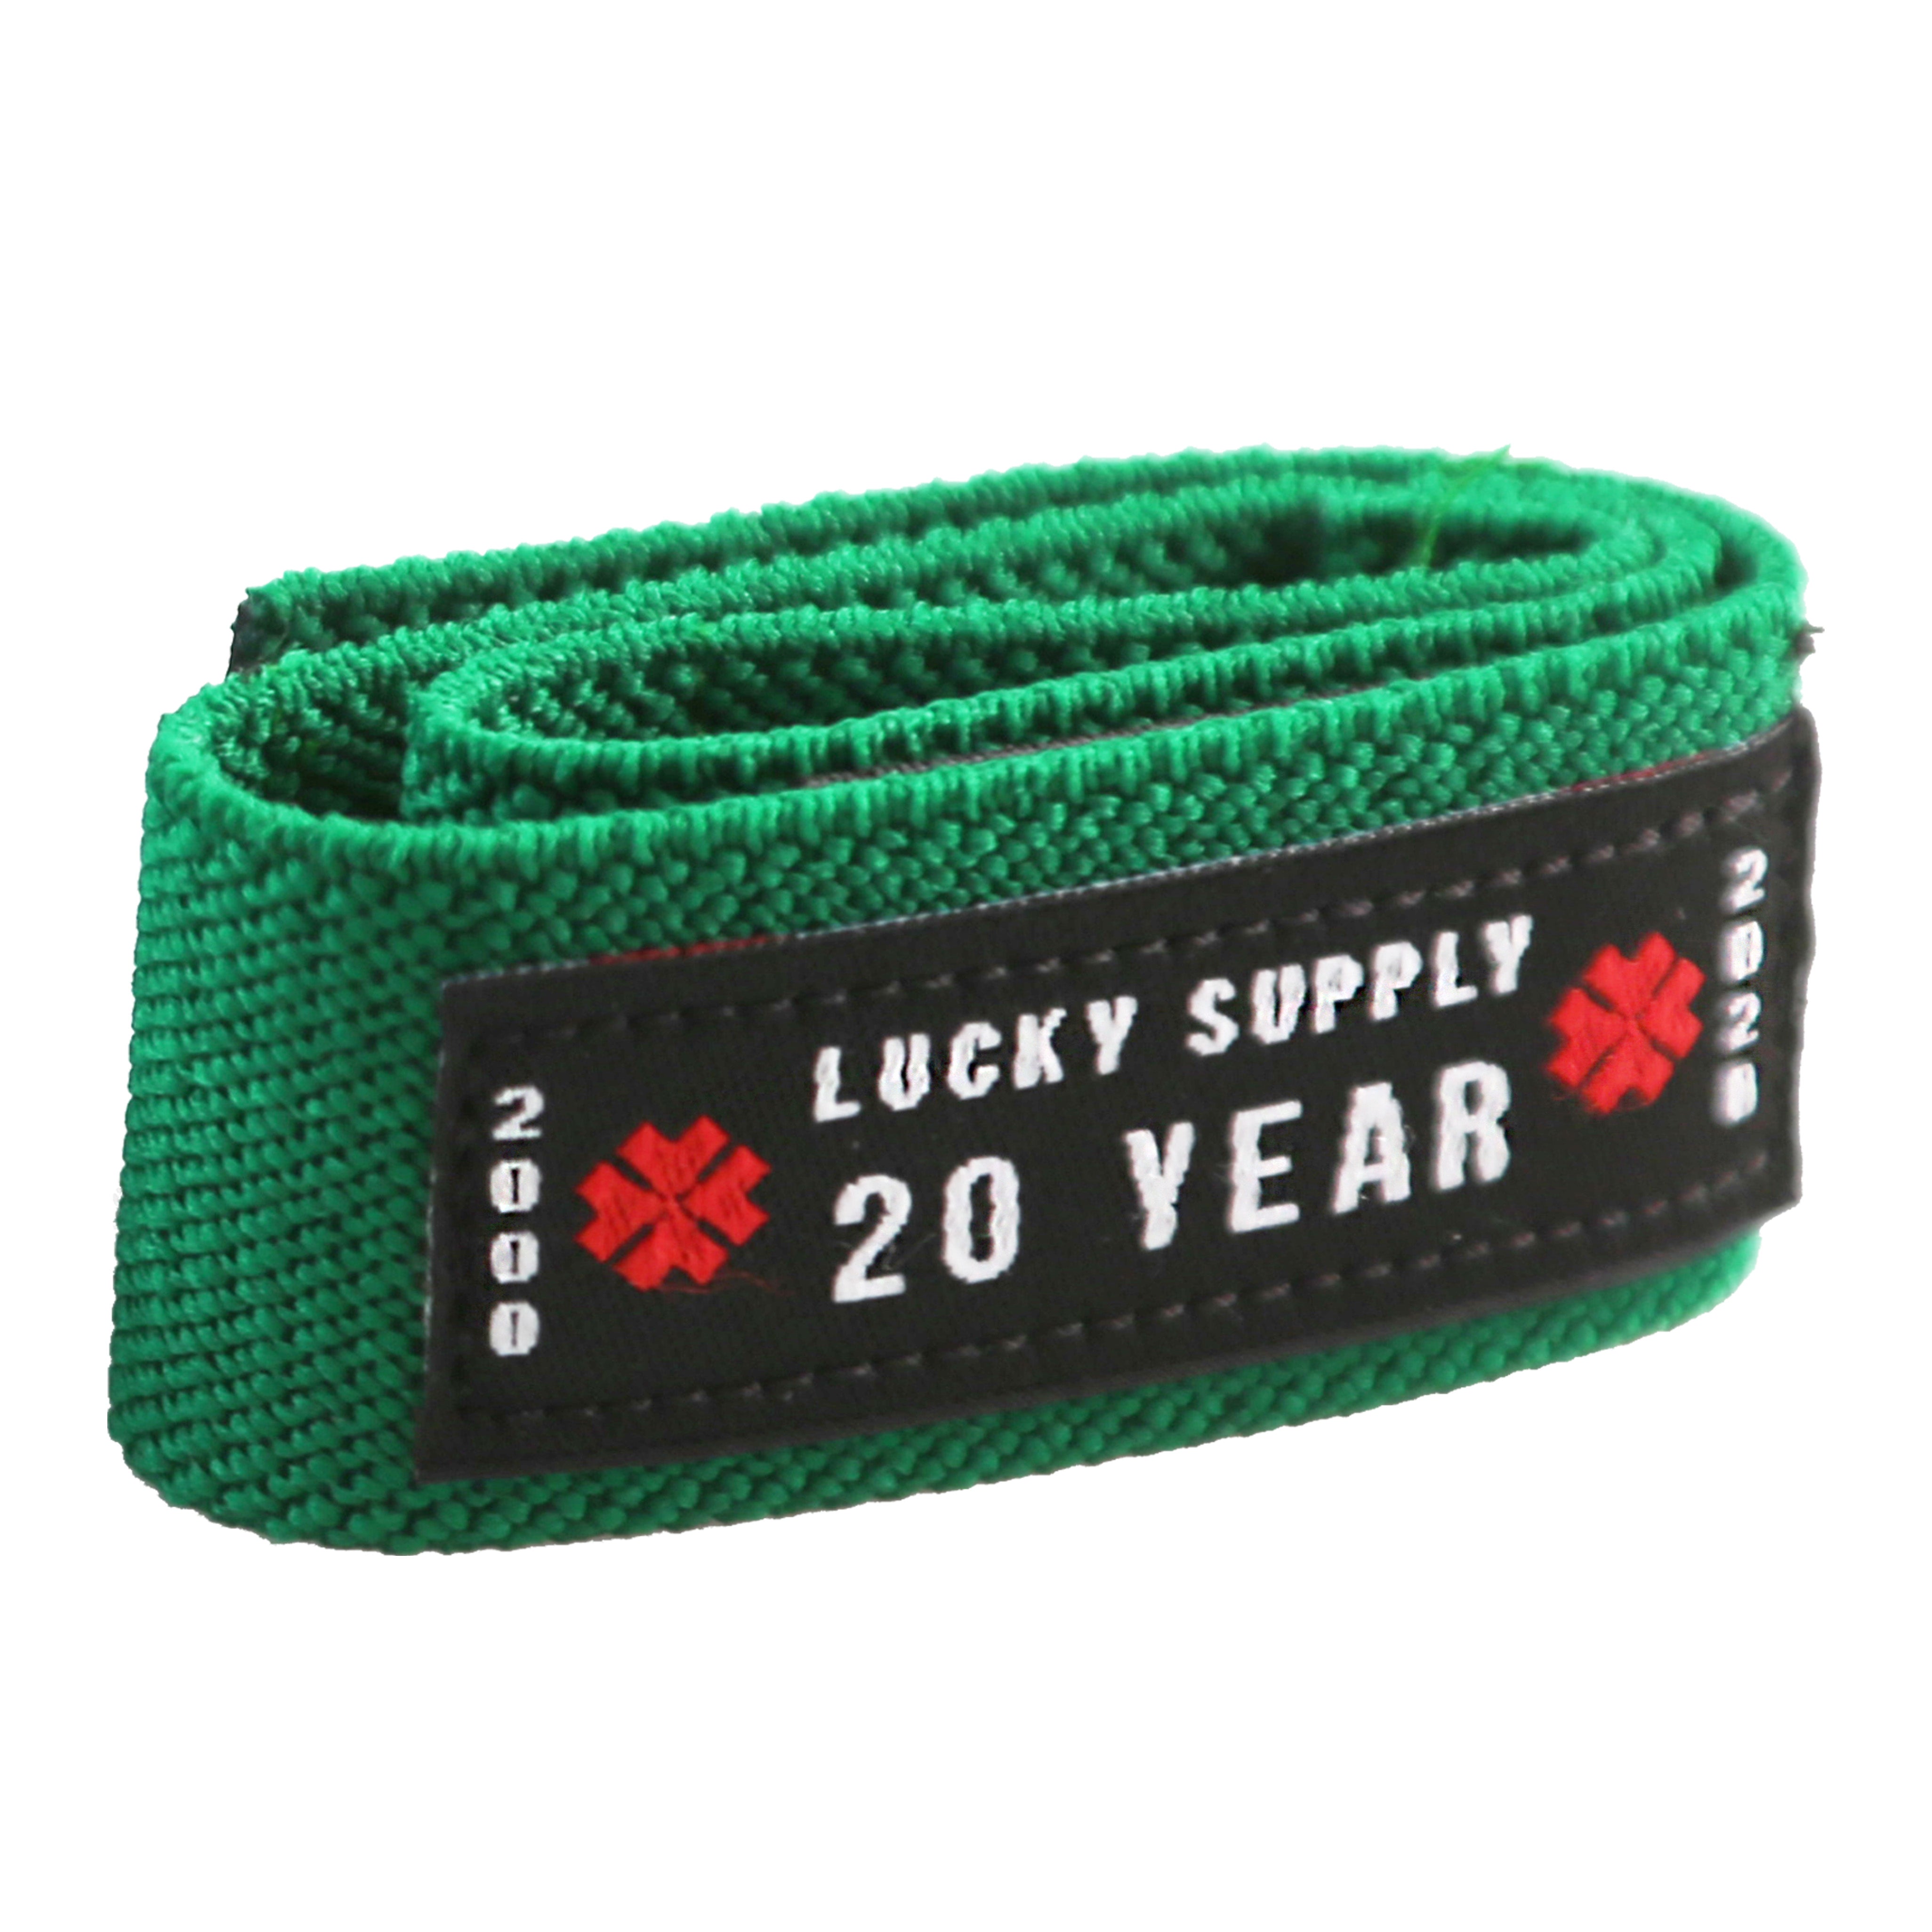 Lucky Supply 20 Year Anniversary Wag Wallet